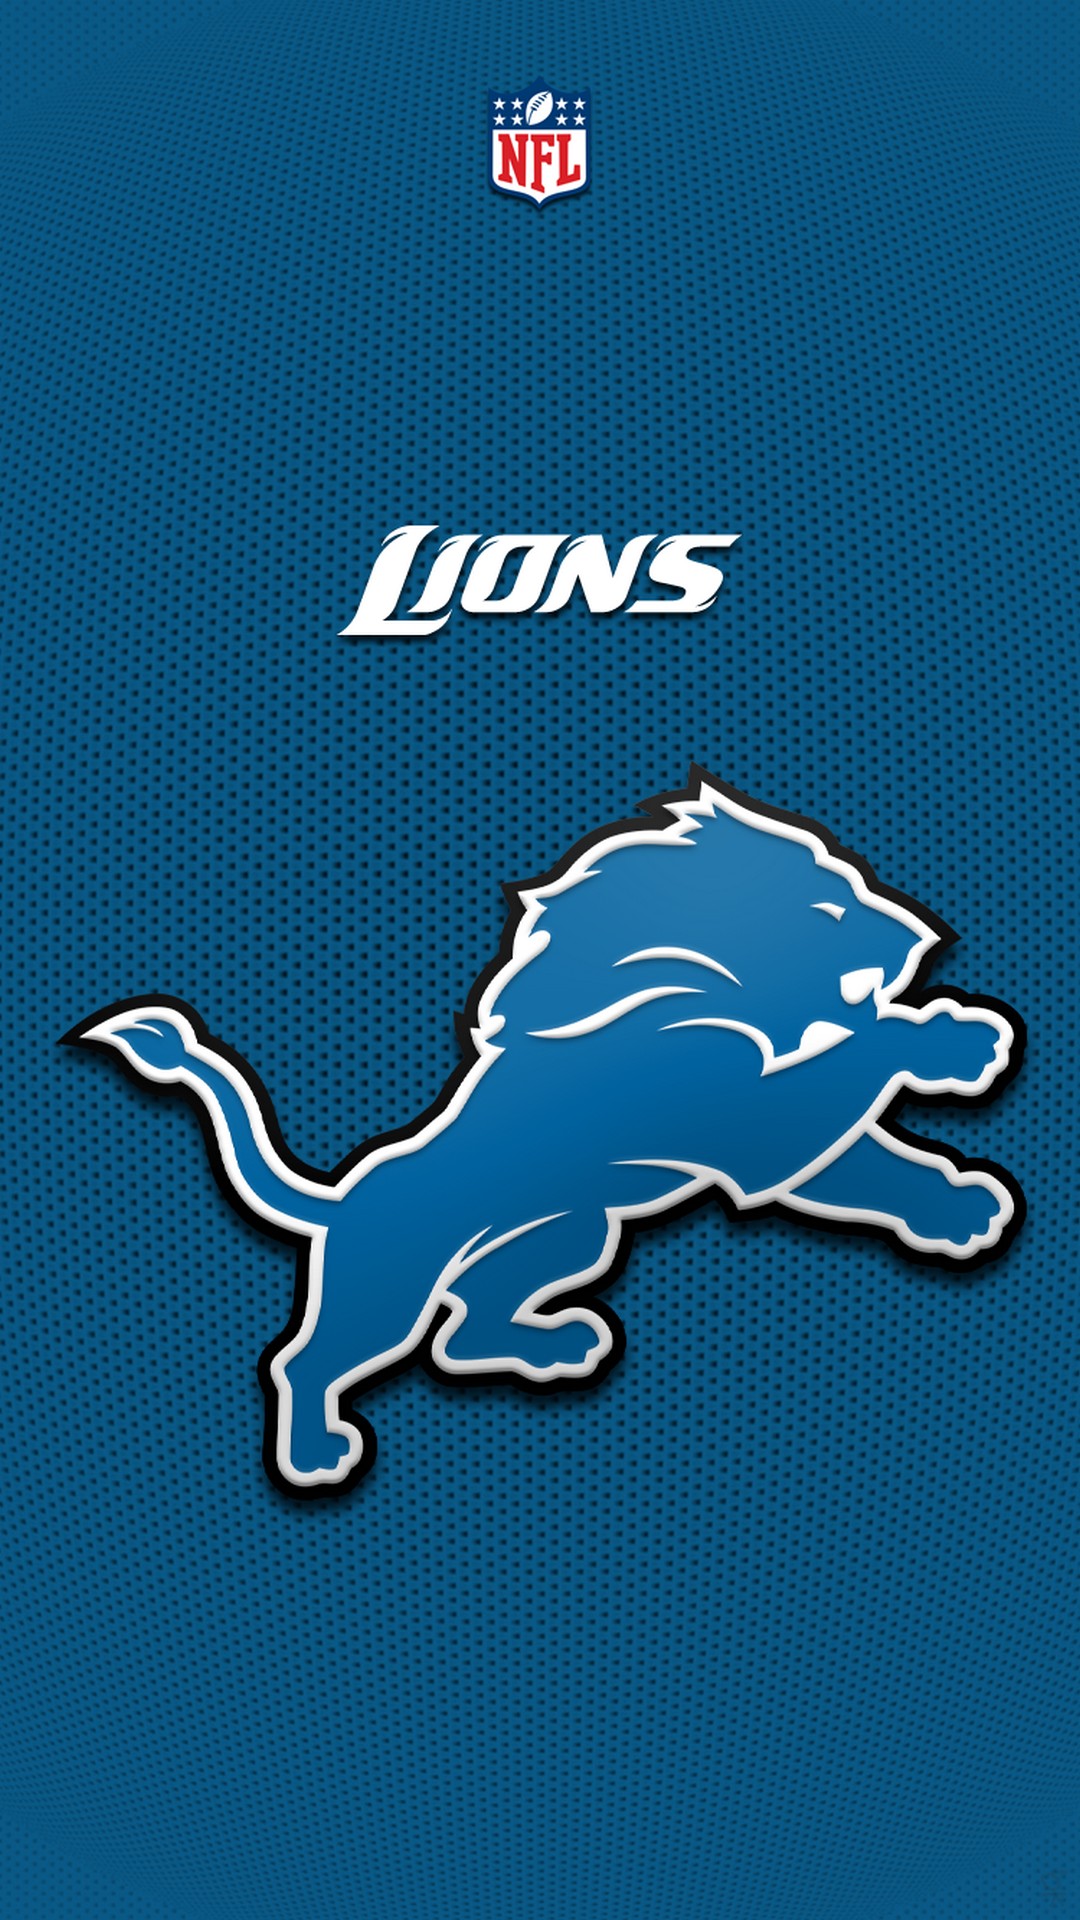 Detroit Lions iPhone 8 Wallpaper with high-resolution 1080x1920 pixel. Download and set as wallpaper for Apple iPhone X, XS Max, XR, 8, 7, 6, SE, iPad, Android